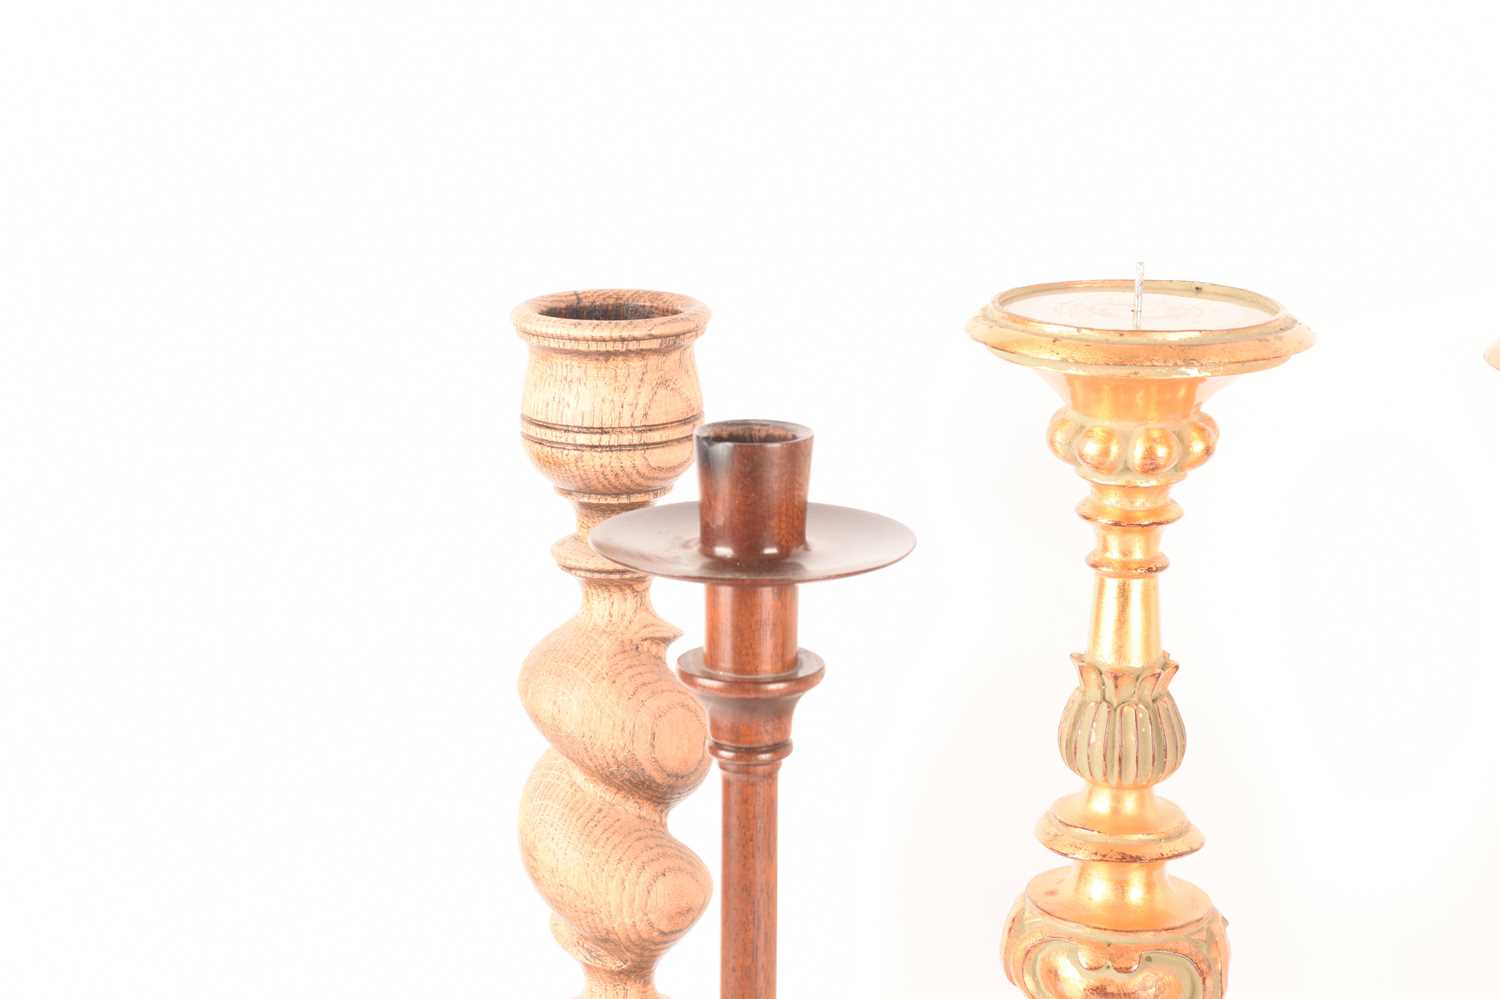 A pair of Mulberry Home oak barley twist and acanthus design candlesticks with Mulberry England labe - Image 5 of 5